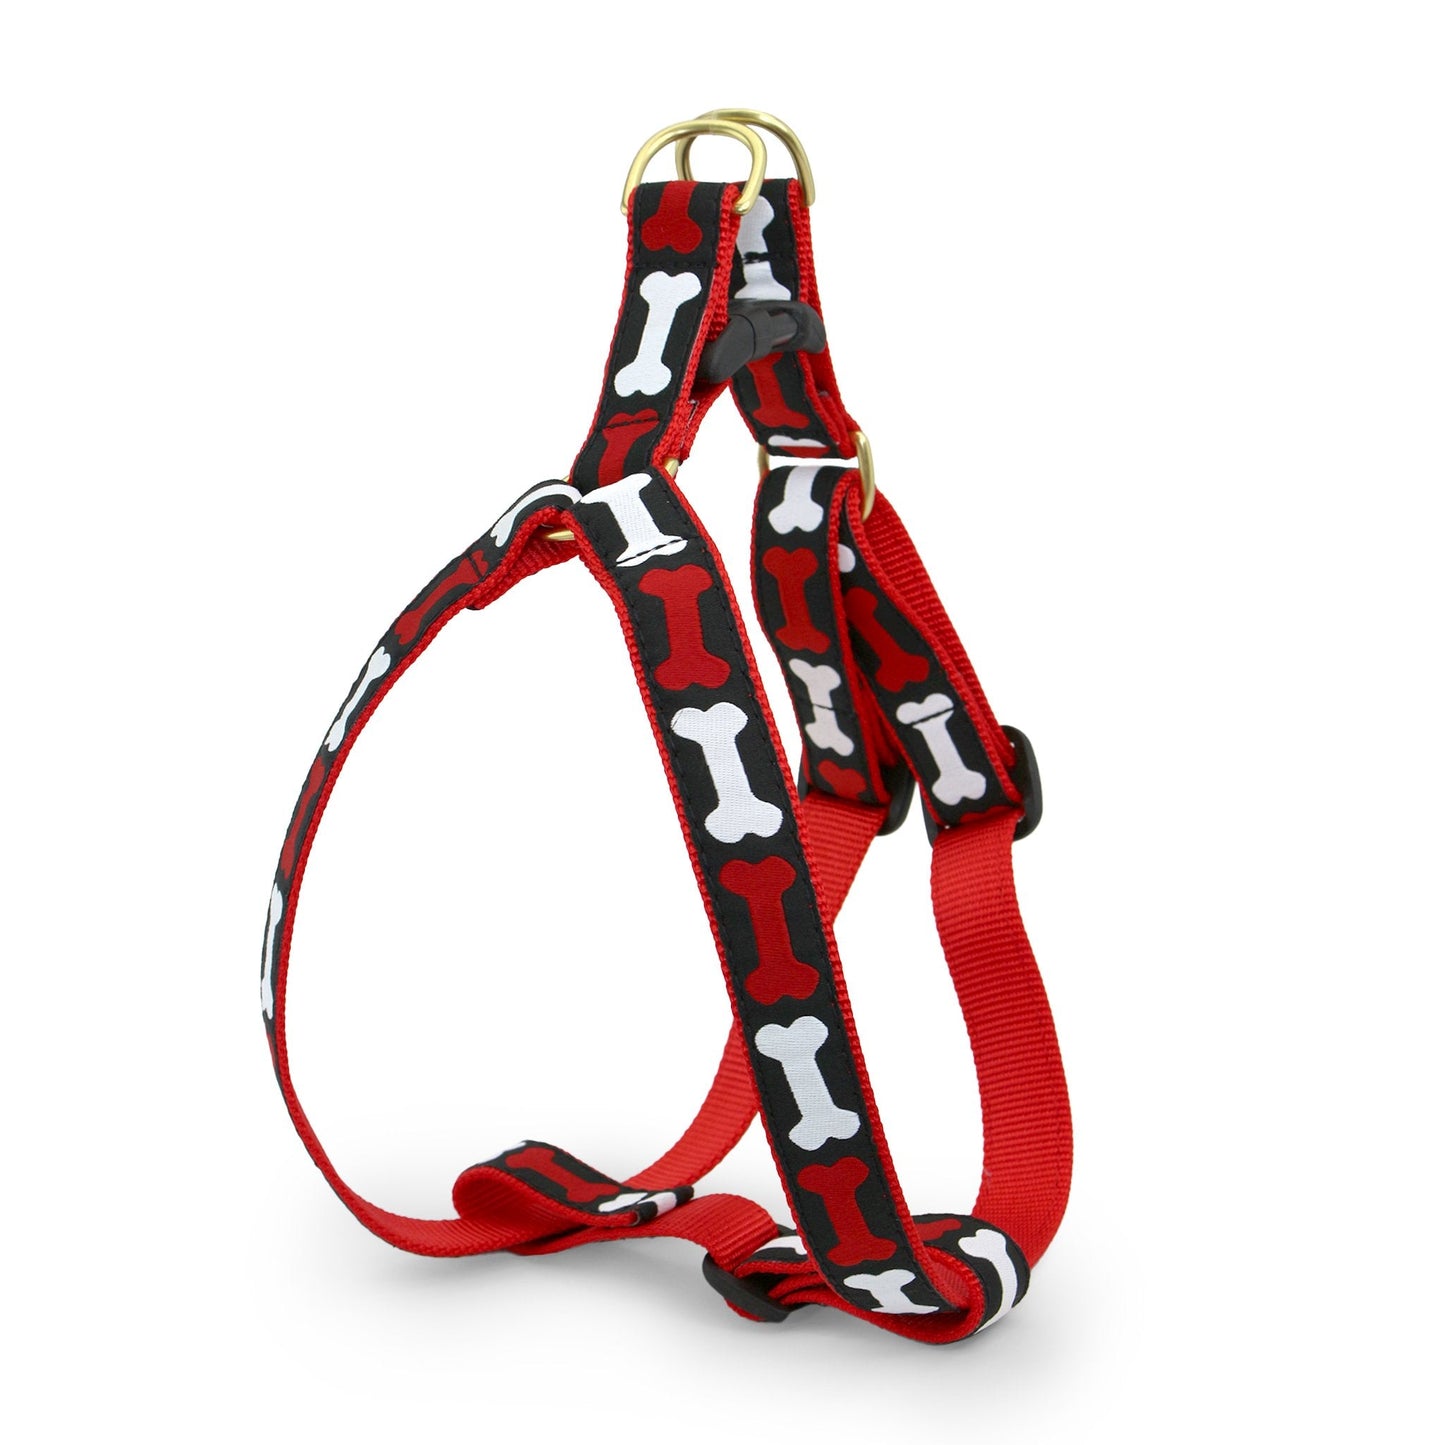 No Bones About It Dog Harness by Up Country